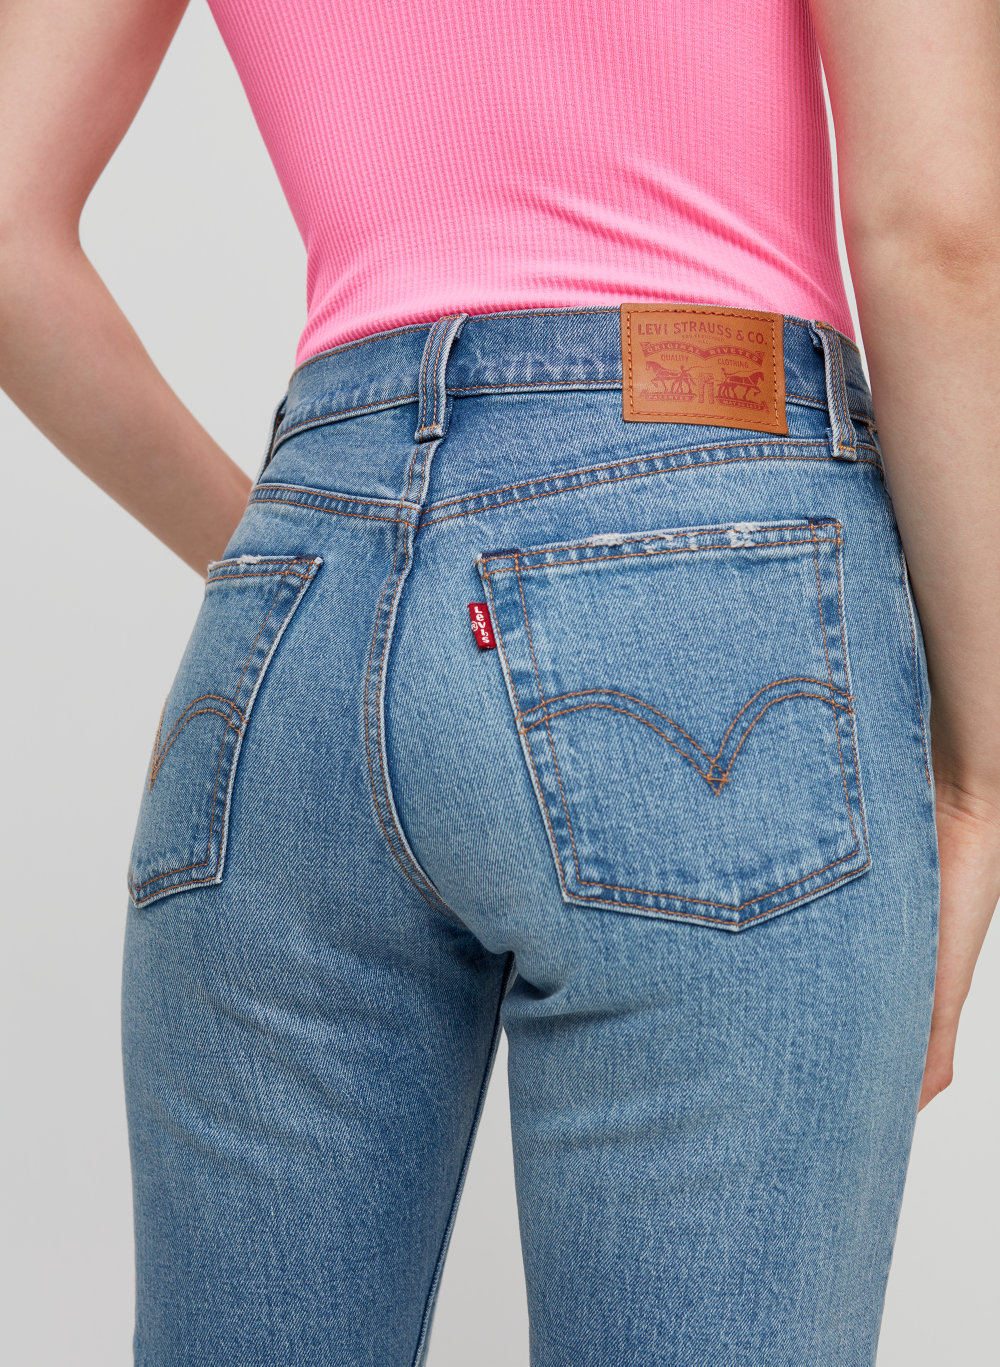 levi's wedgie mom jeans